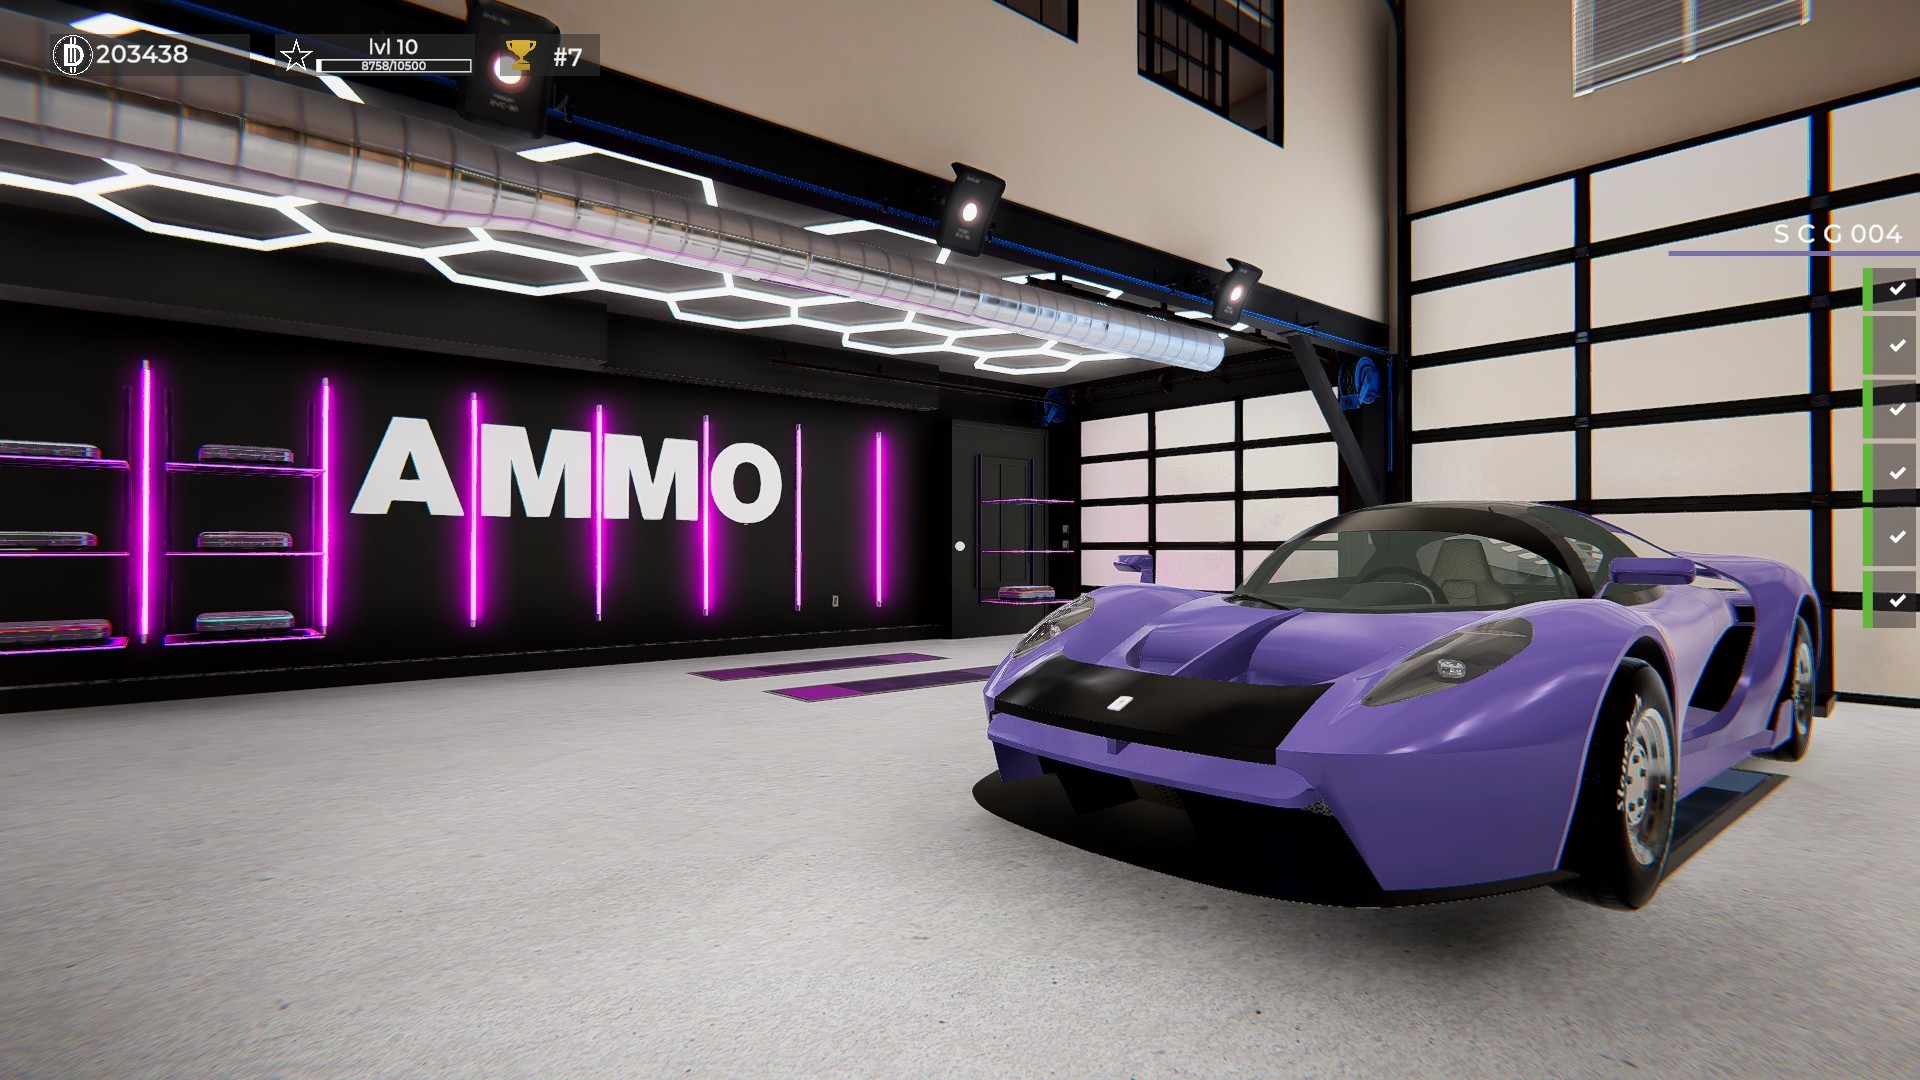 Car Detailing Simulator - AMMO NYC DLC Free Download for PC